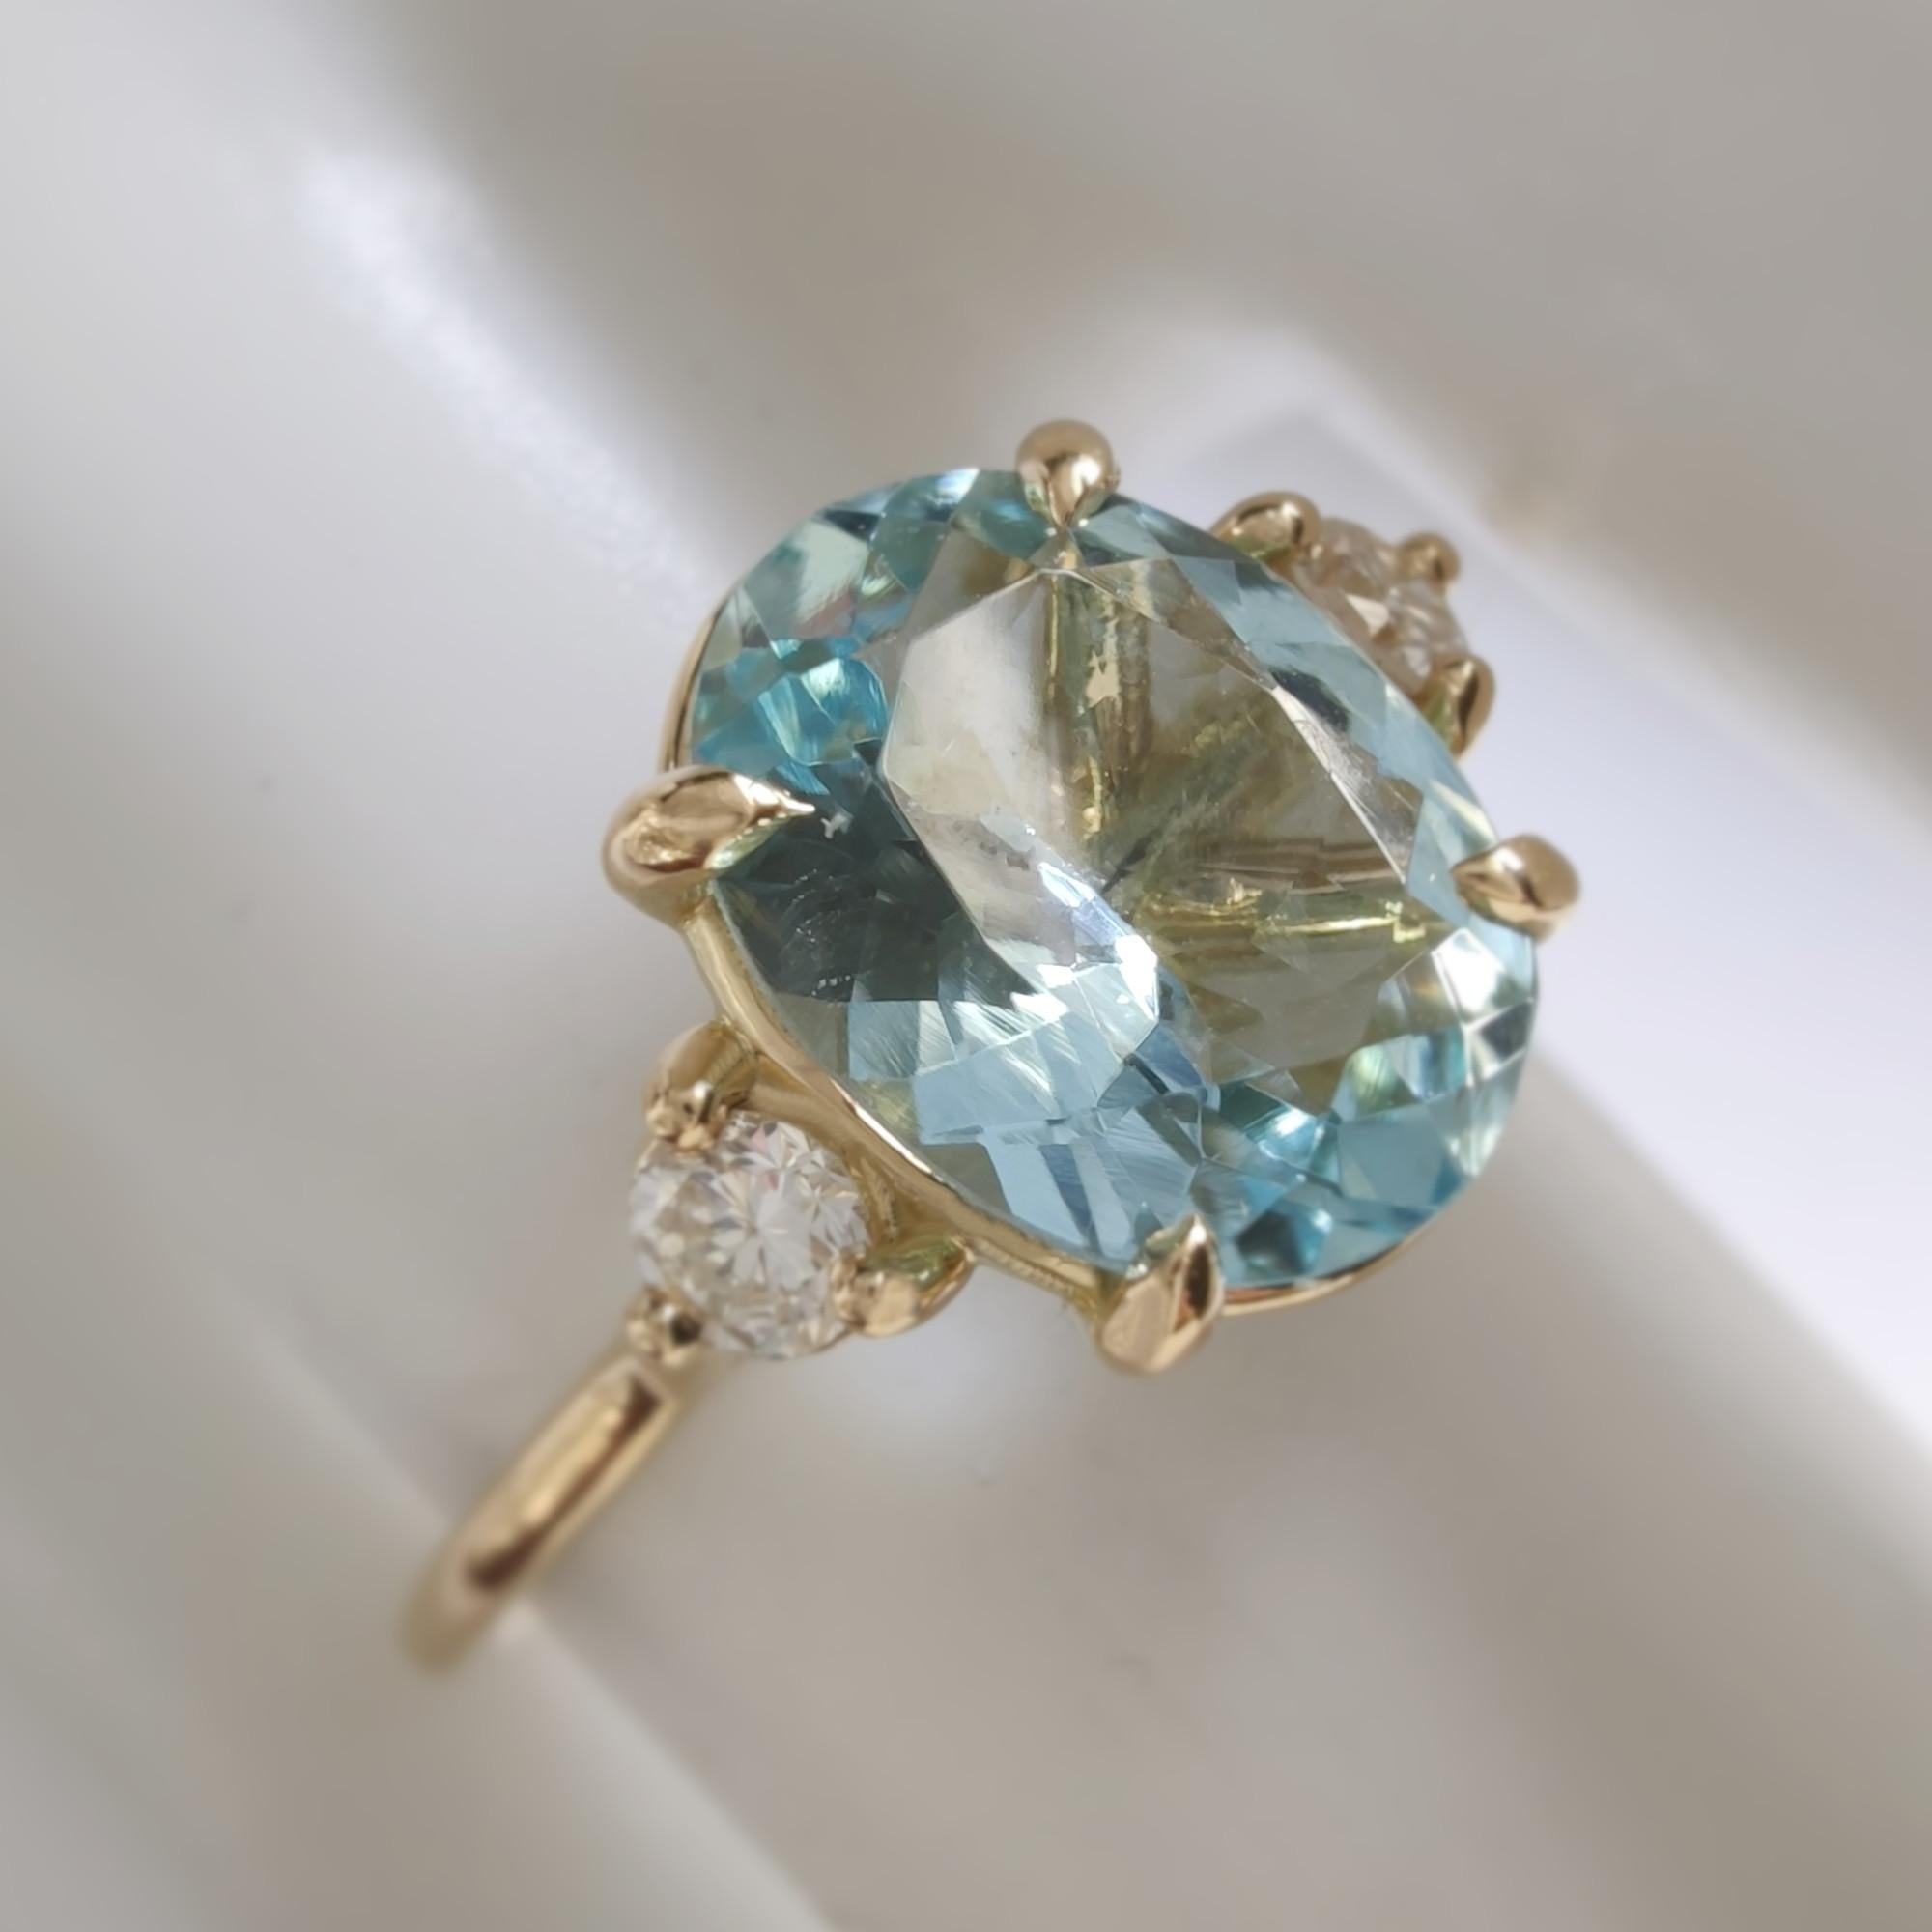 Discover elegance with our 18K Gold Trilogy Ring, featuring a stunning 1.36ct oval aquamarine and two brilliant diamonds. Perfect blend of luxury and style.

TECHNICAL DETAIL
Aquamarine
Cut: Emerald
Dimensions: 0.354 x 0.270 x 0.149 Ins
Carat